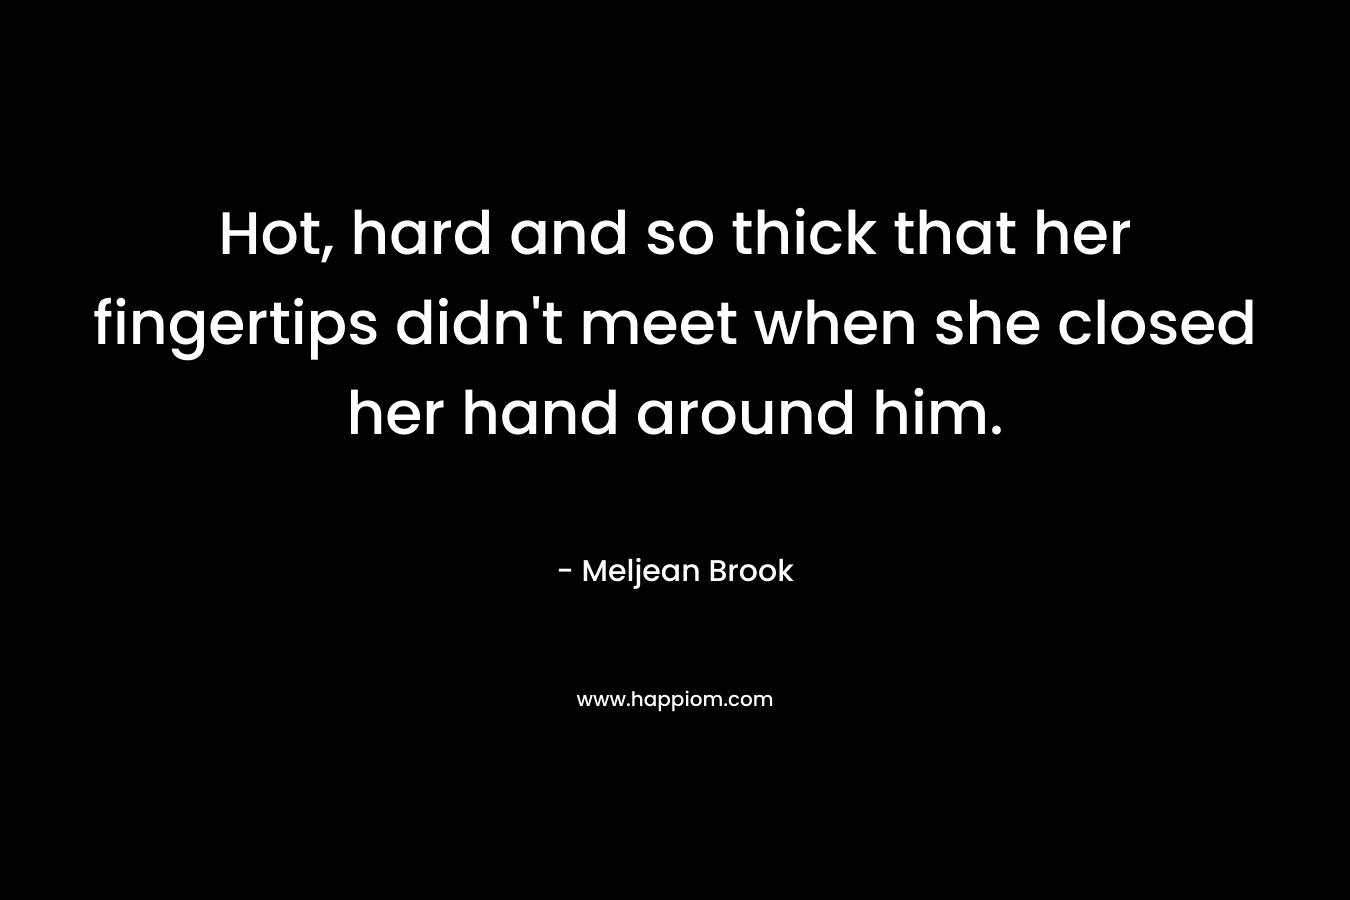 Hot, hard and so thick that her fingertips didn't meet when she closed her hand around him.